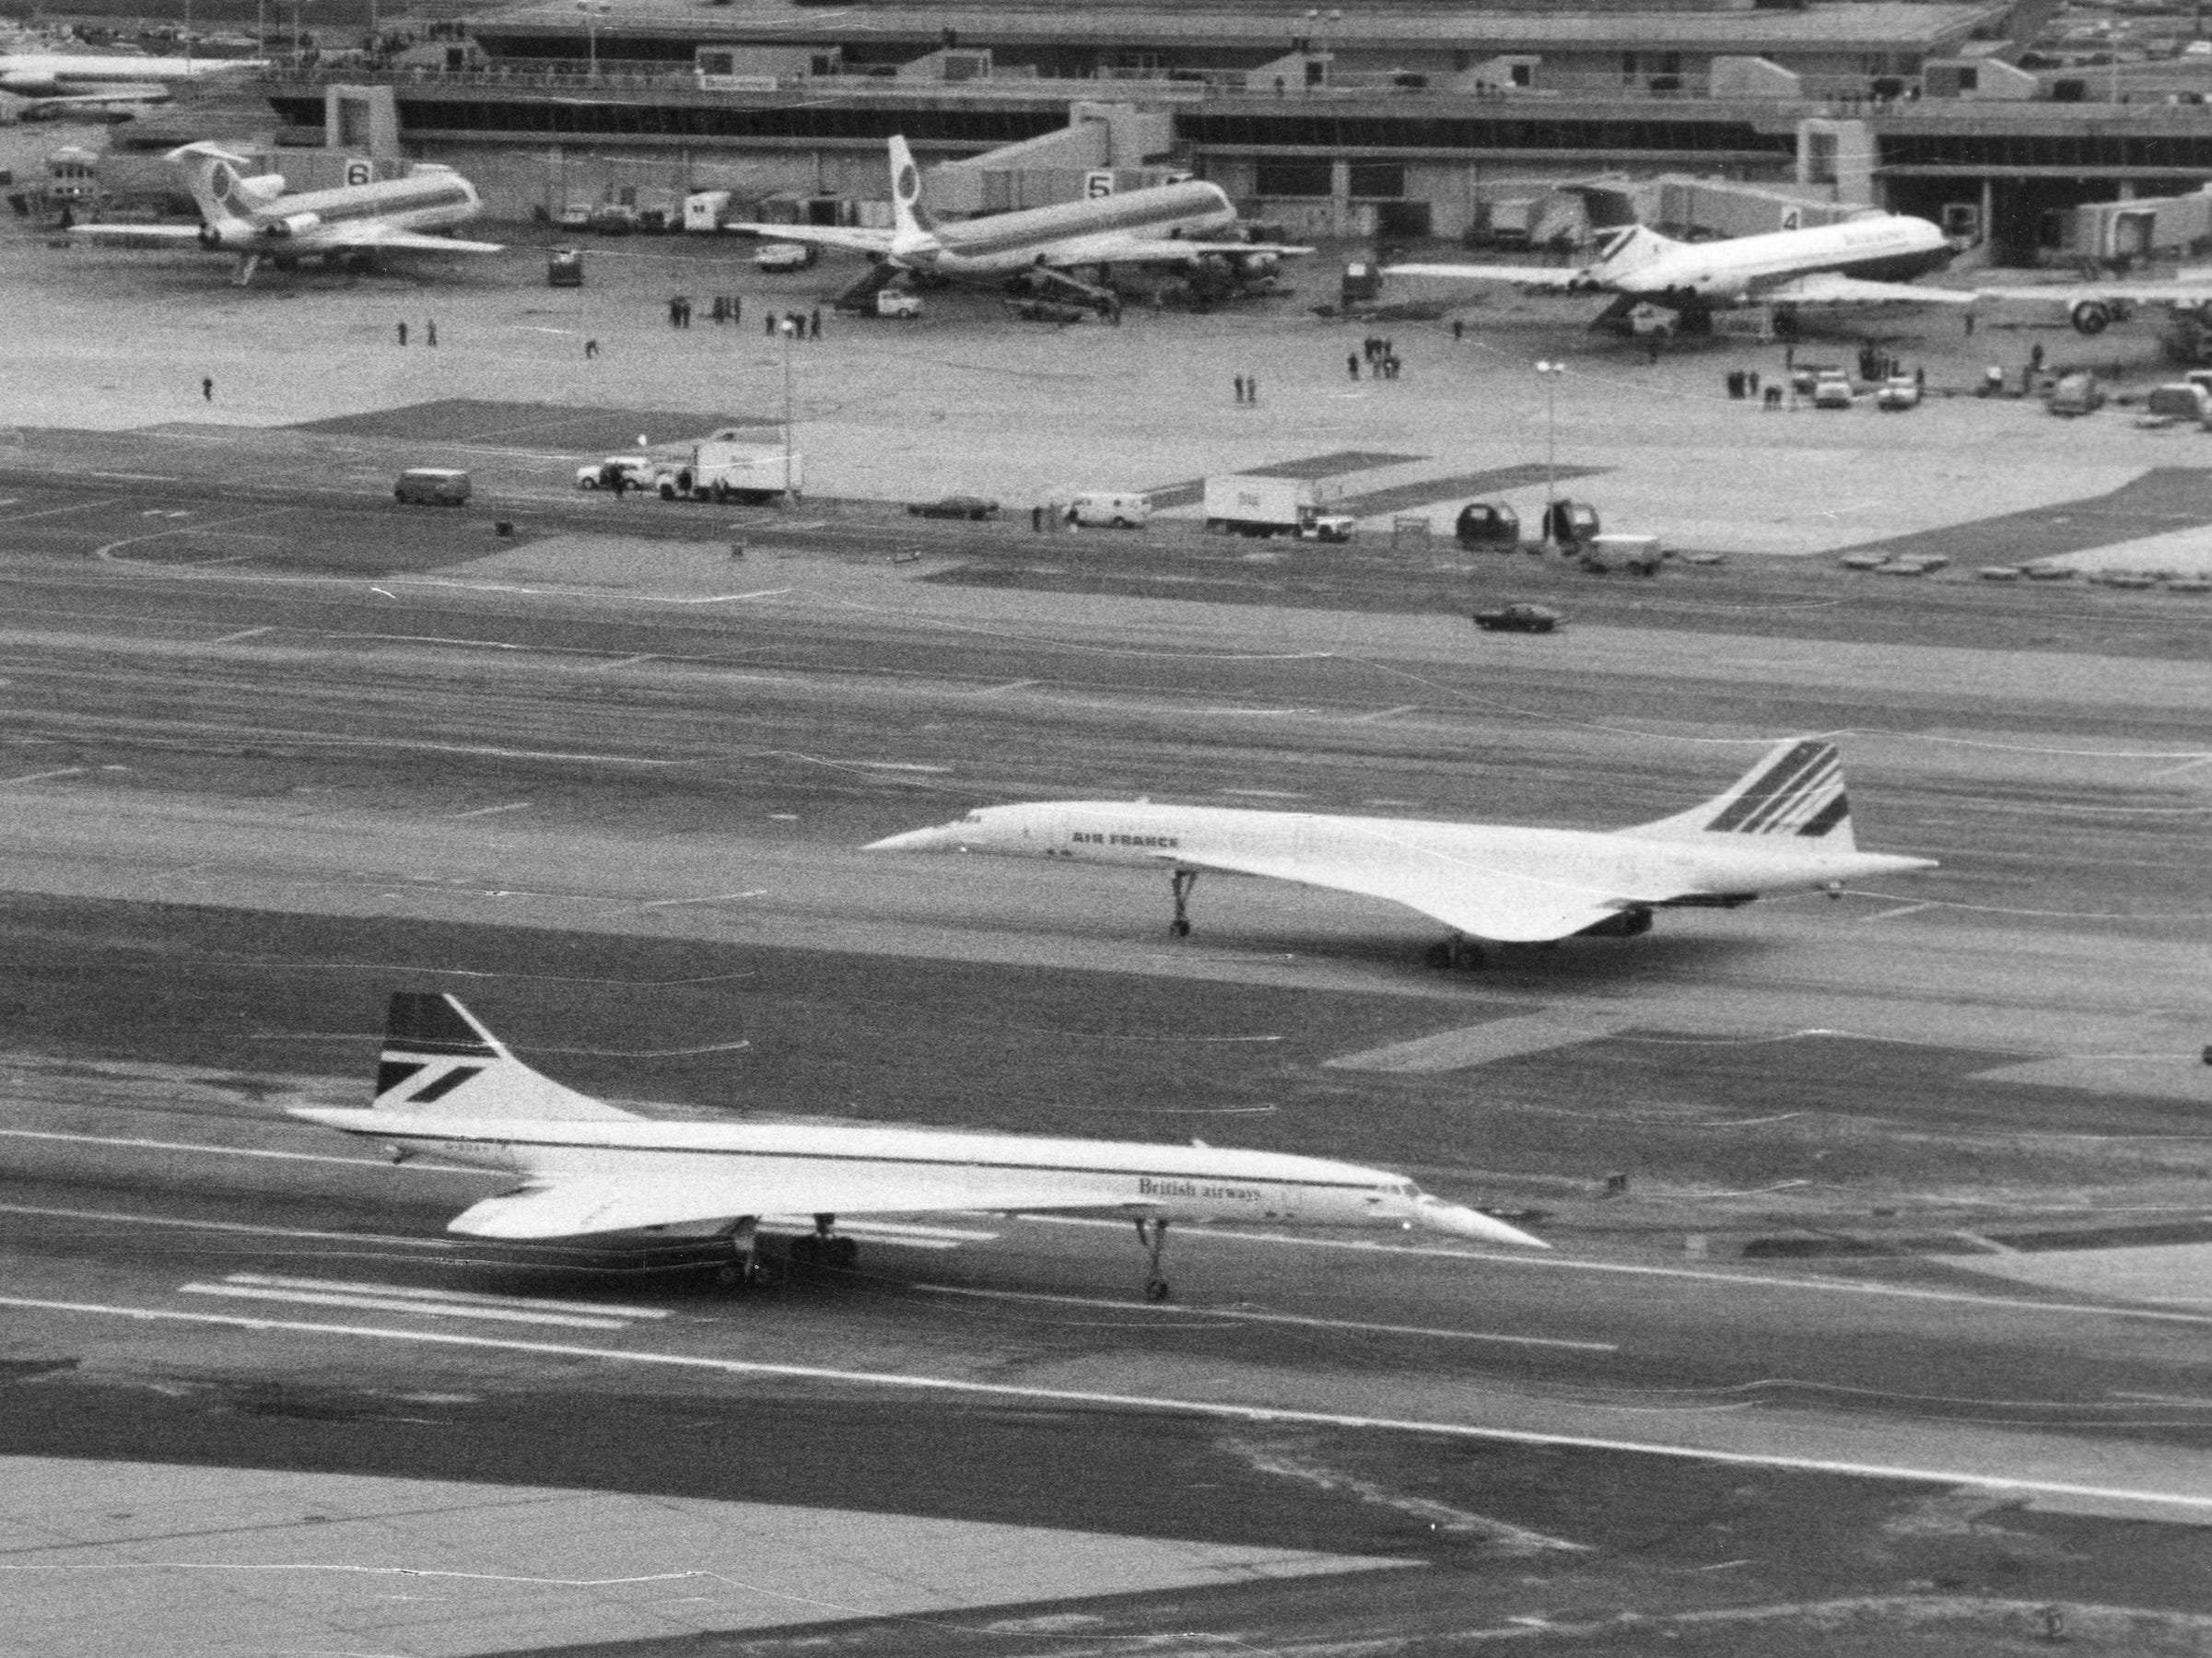 A BA and AF Concorde pass each other at JFK.